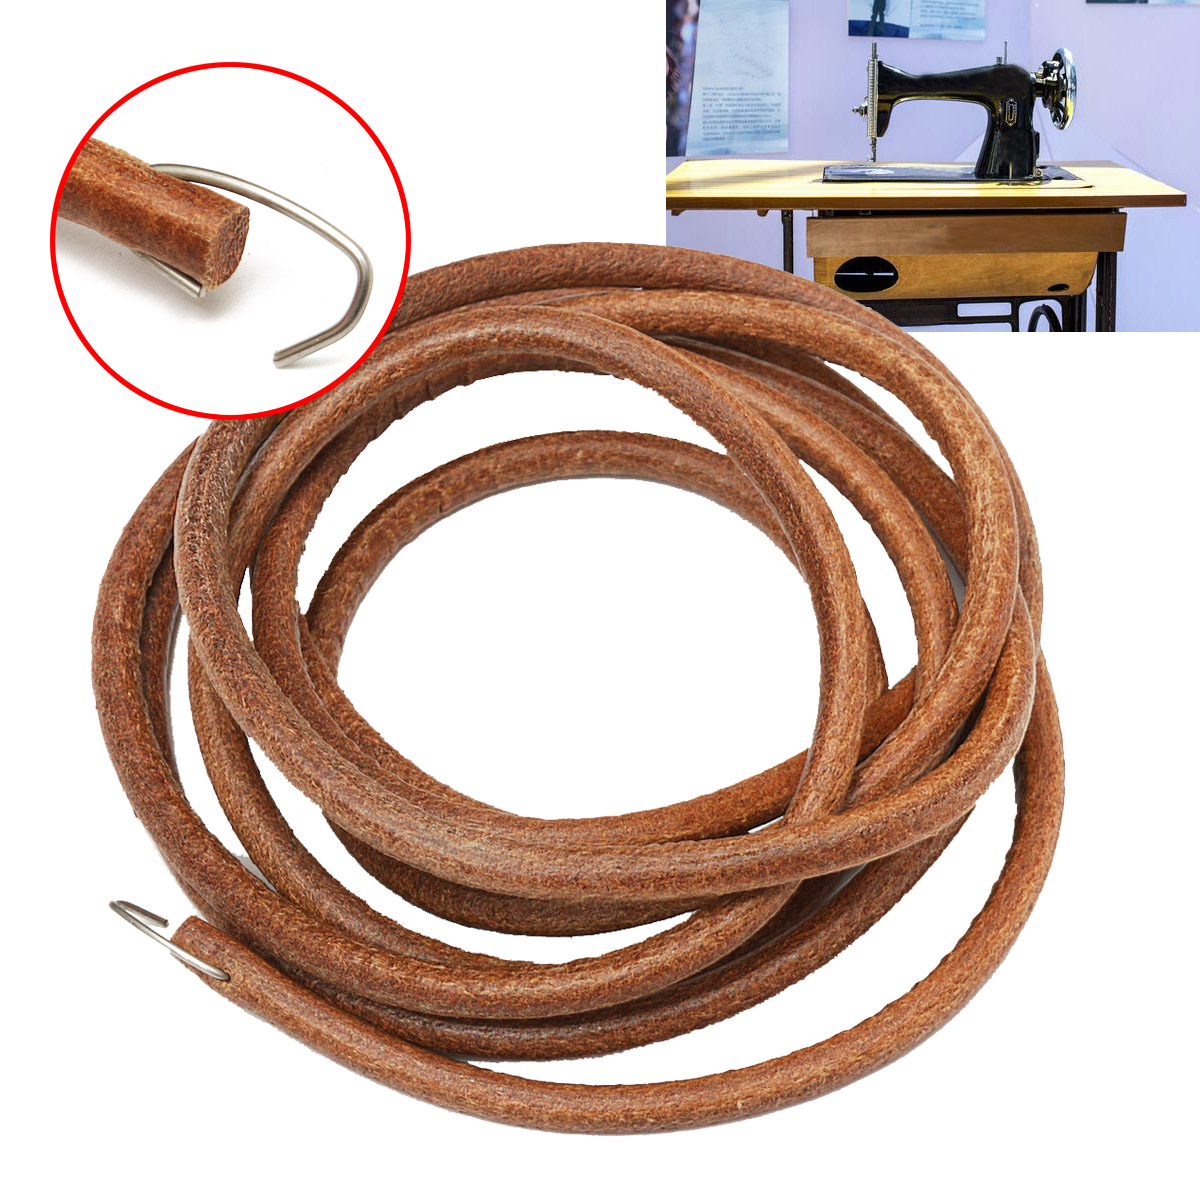 183cm-Leather-Belt-Treadle-Parts-With-Hook-For-Singer-Sewing-Machine-5mm-Diameter-1265373-5